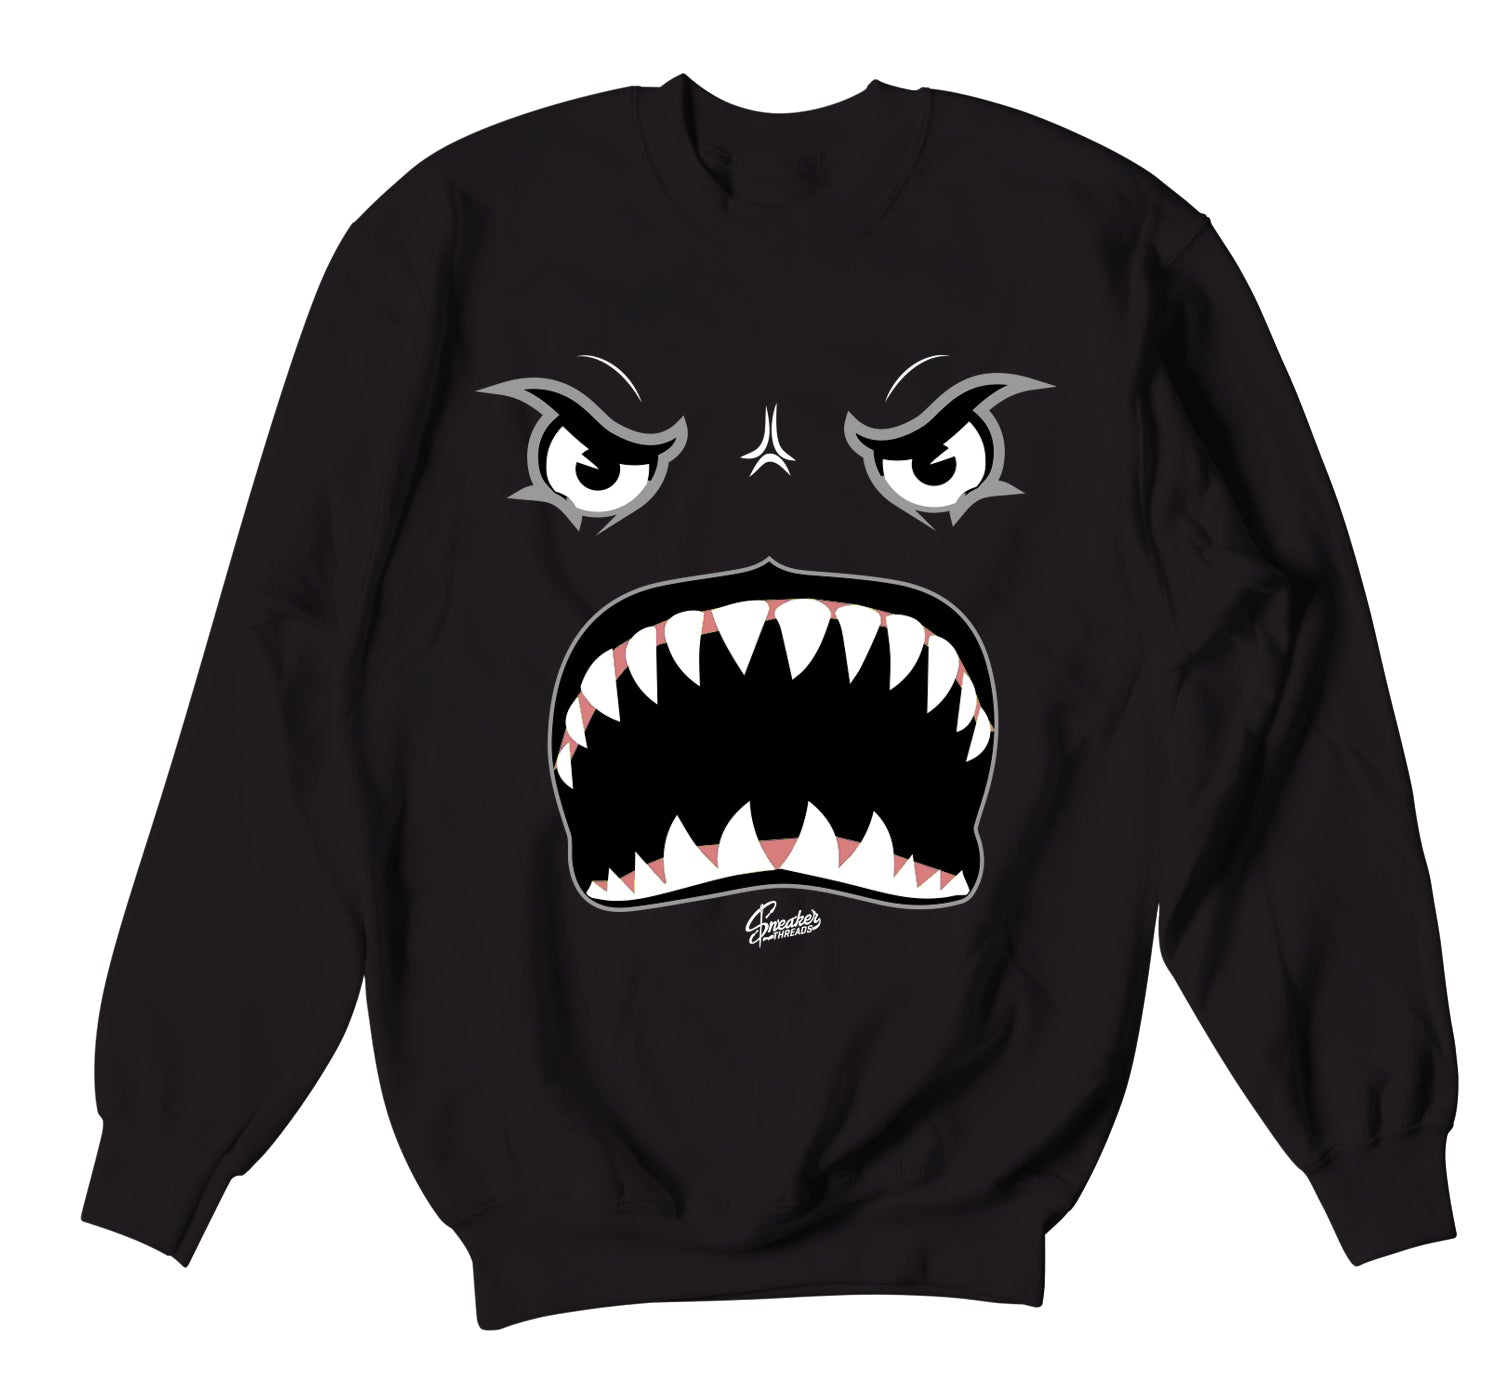 Crewneck sweater designed to match the air max 90 metallic rose gold sneakers